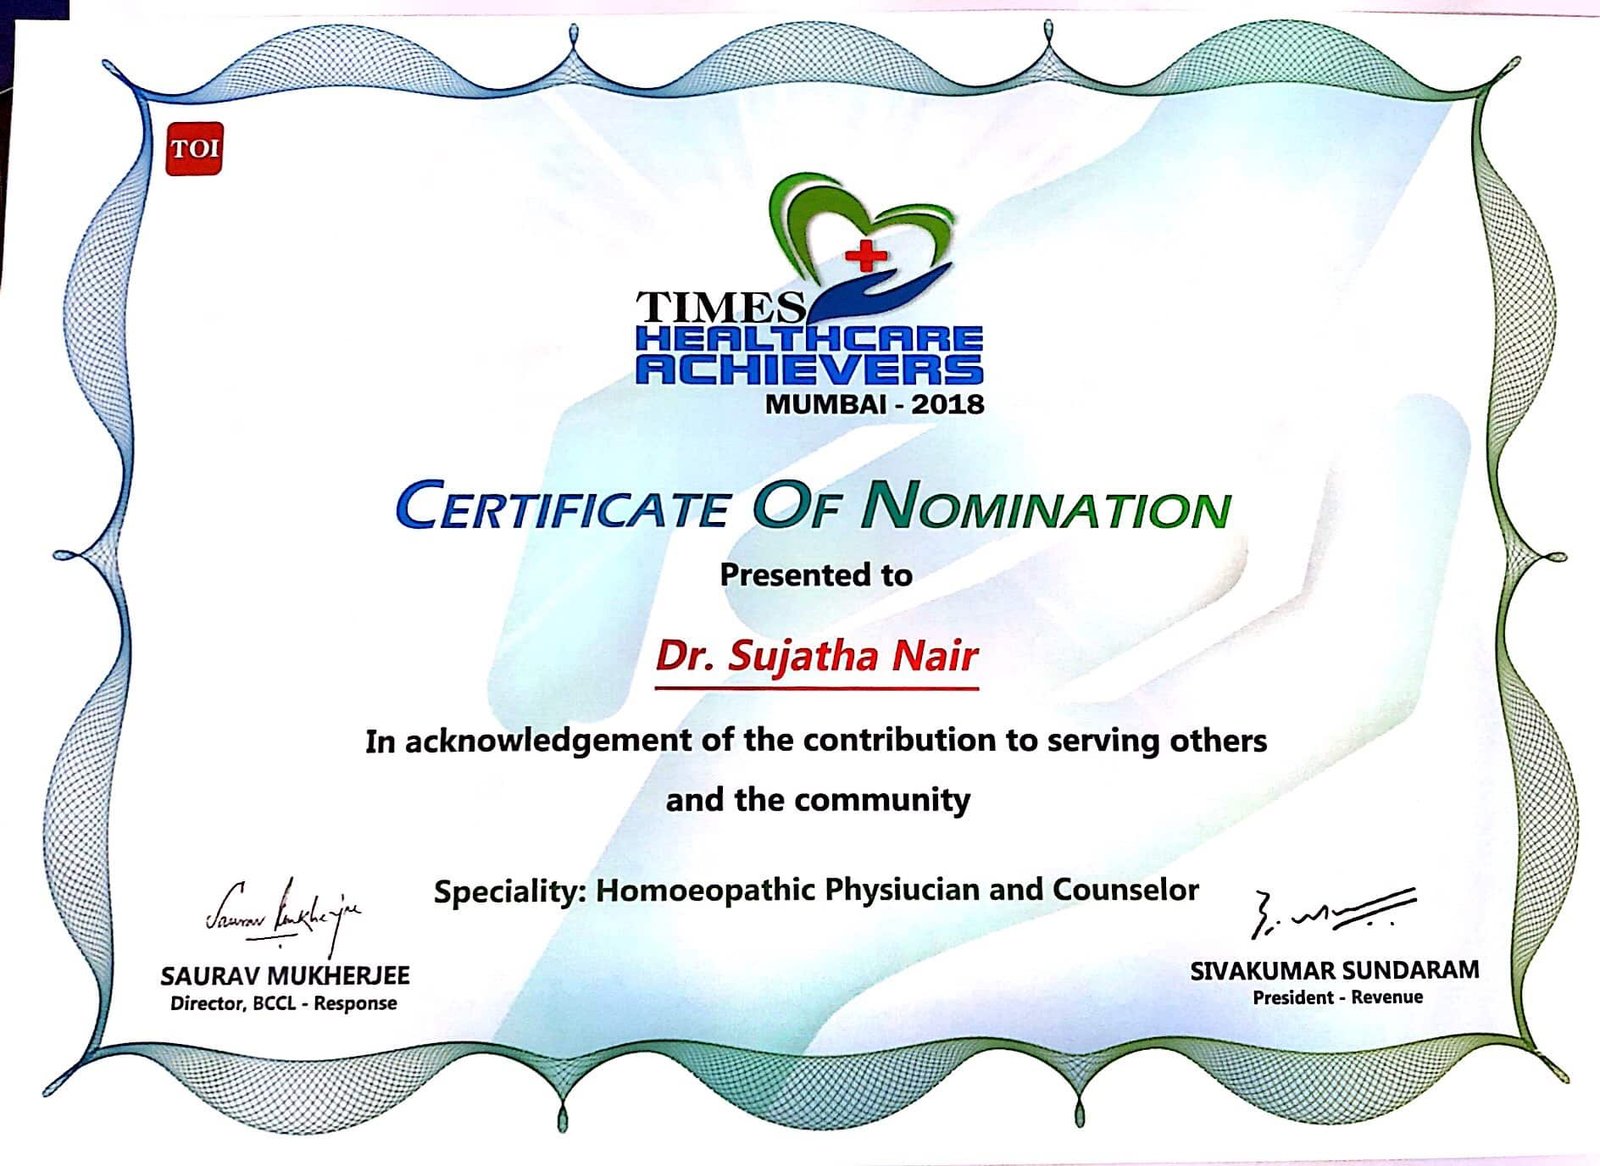 CERTIFICATE OF NOMINATION